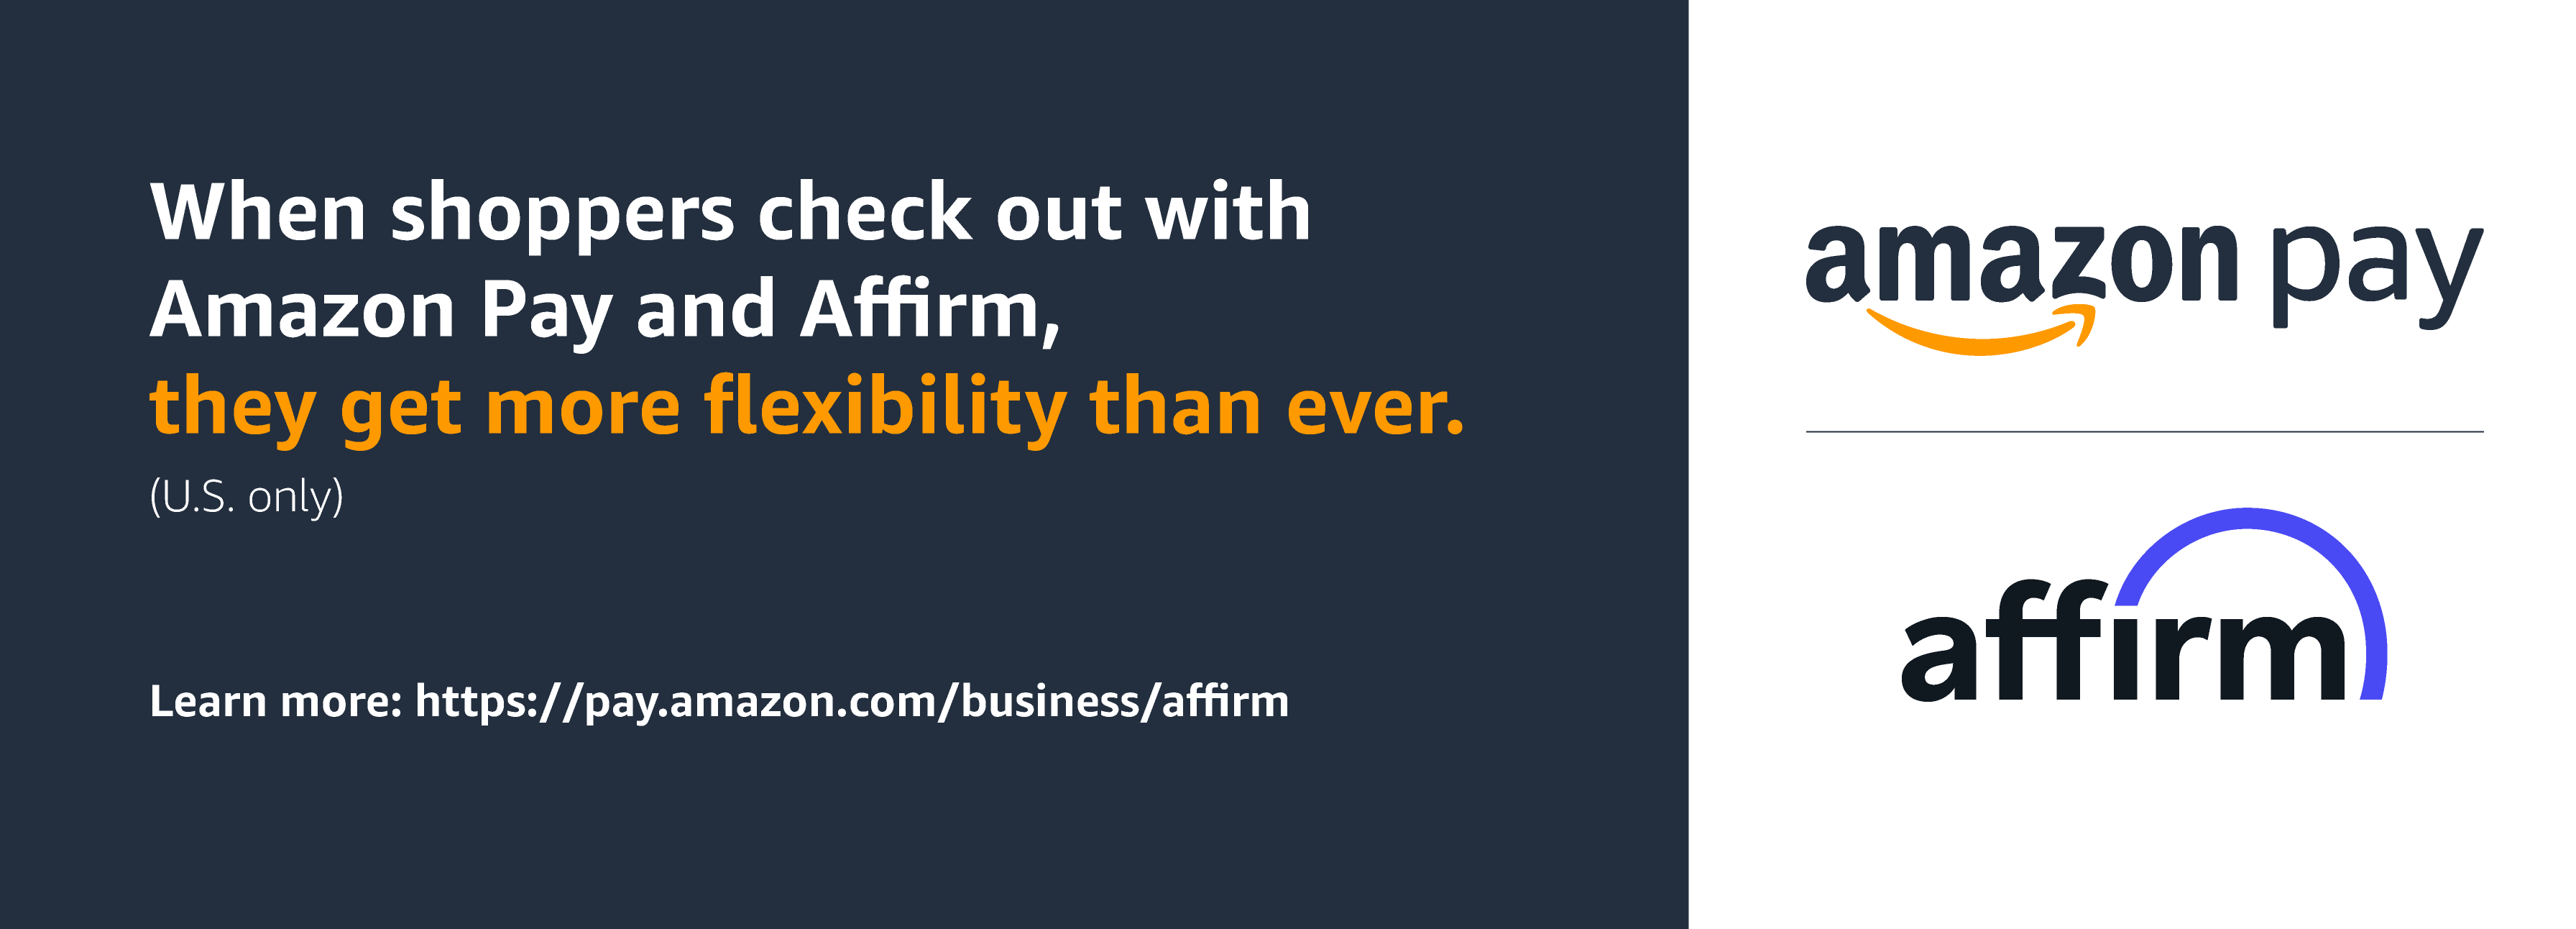 Affirm and Amazon Pay banner